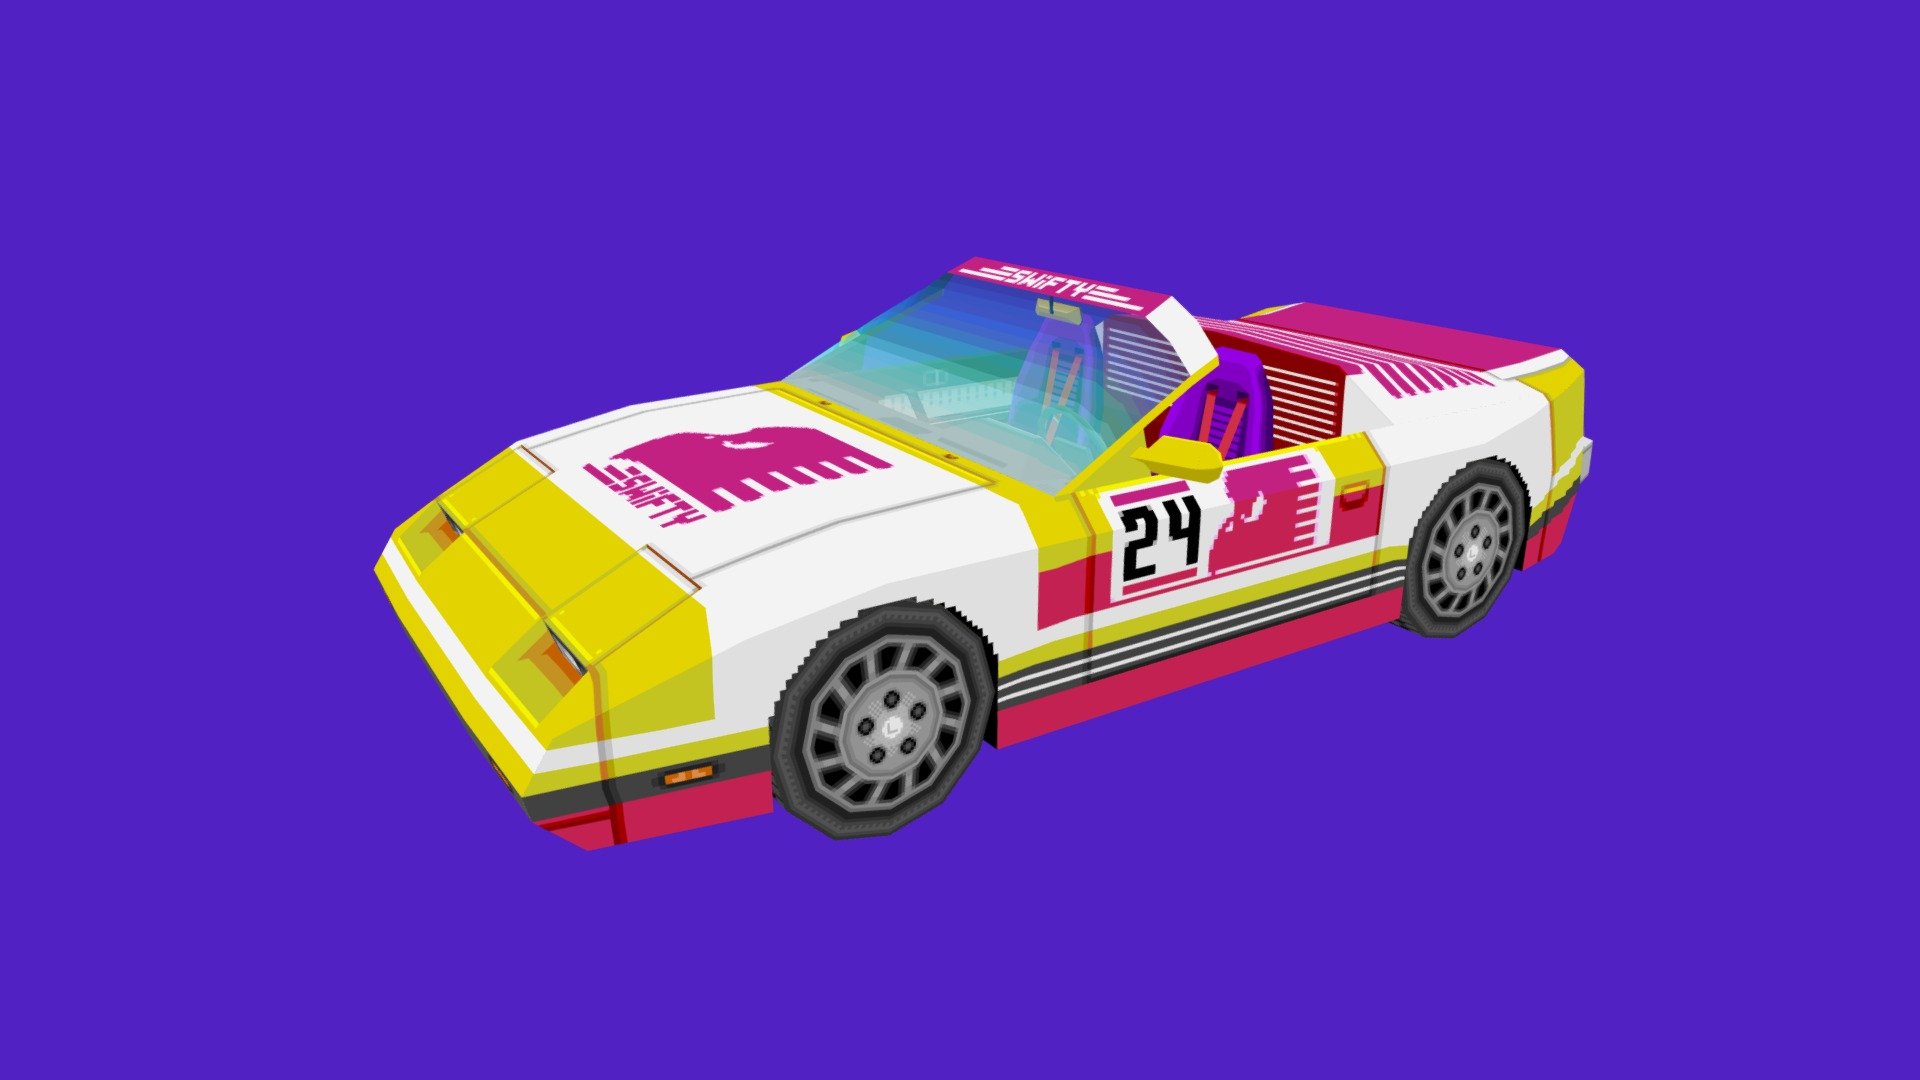 First complete pass of an arcade-style racer, created as part of a concept project. Made for unlit rendering. Based heavily on the Nissan 300ZX 3d model